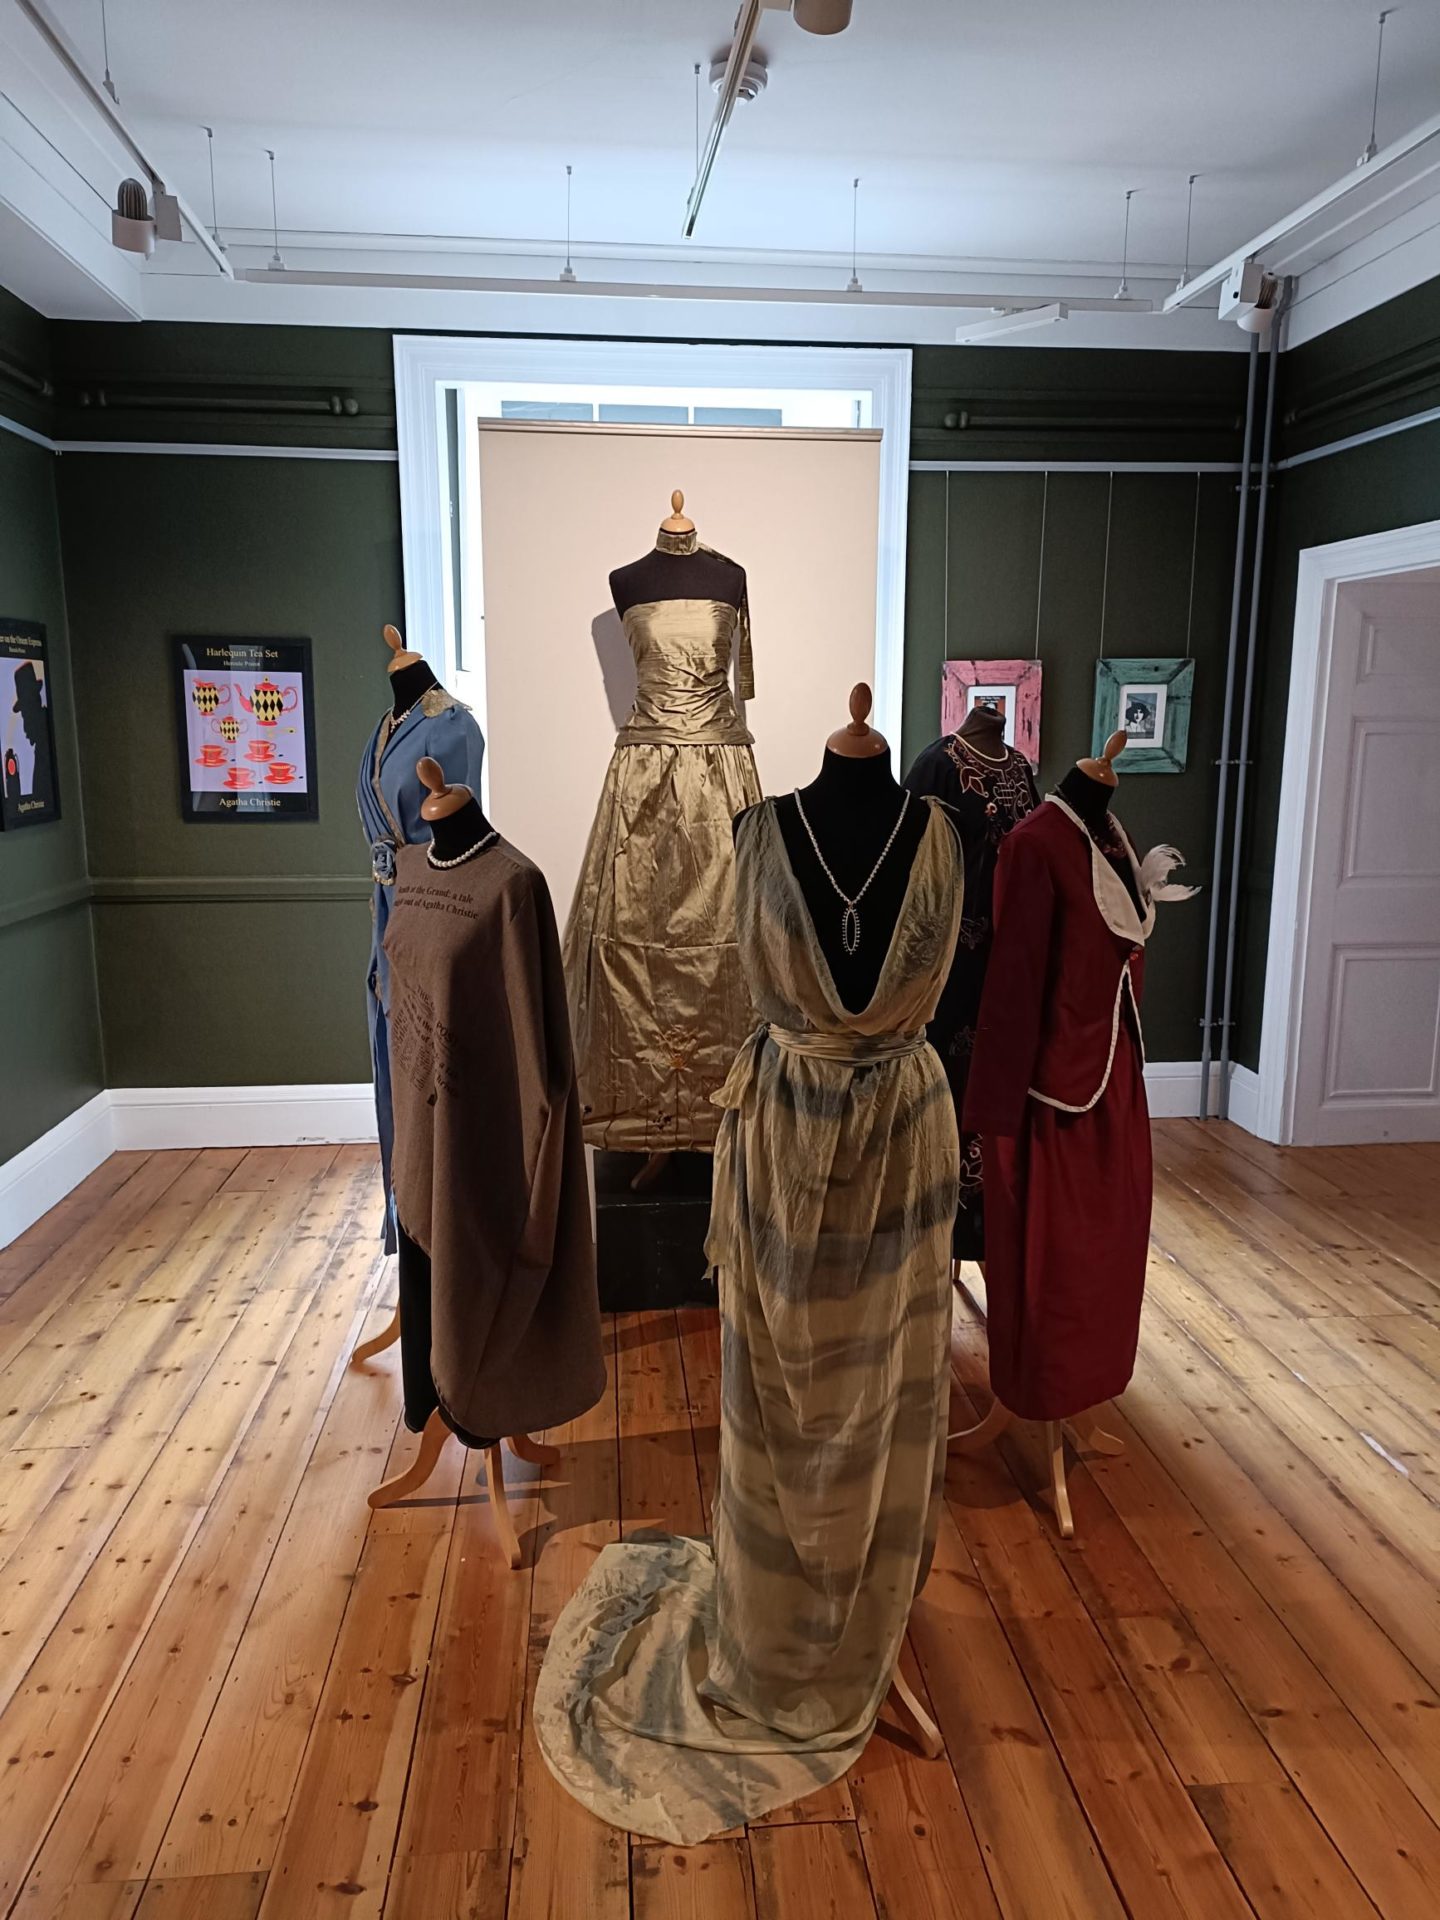 UCSD Students work at Agatha Christie Dressed to Kill exhibition